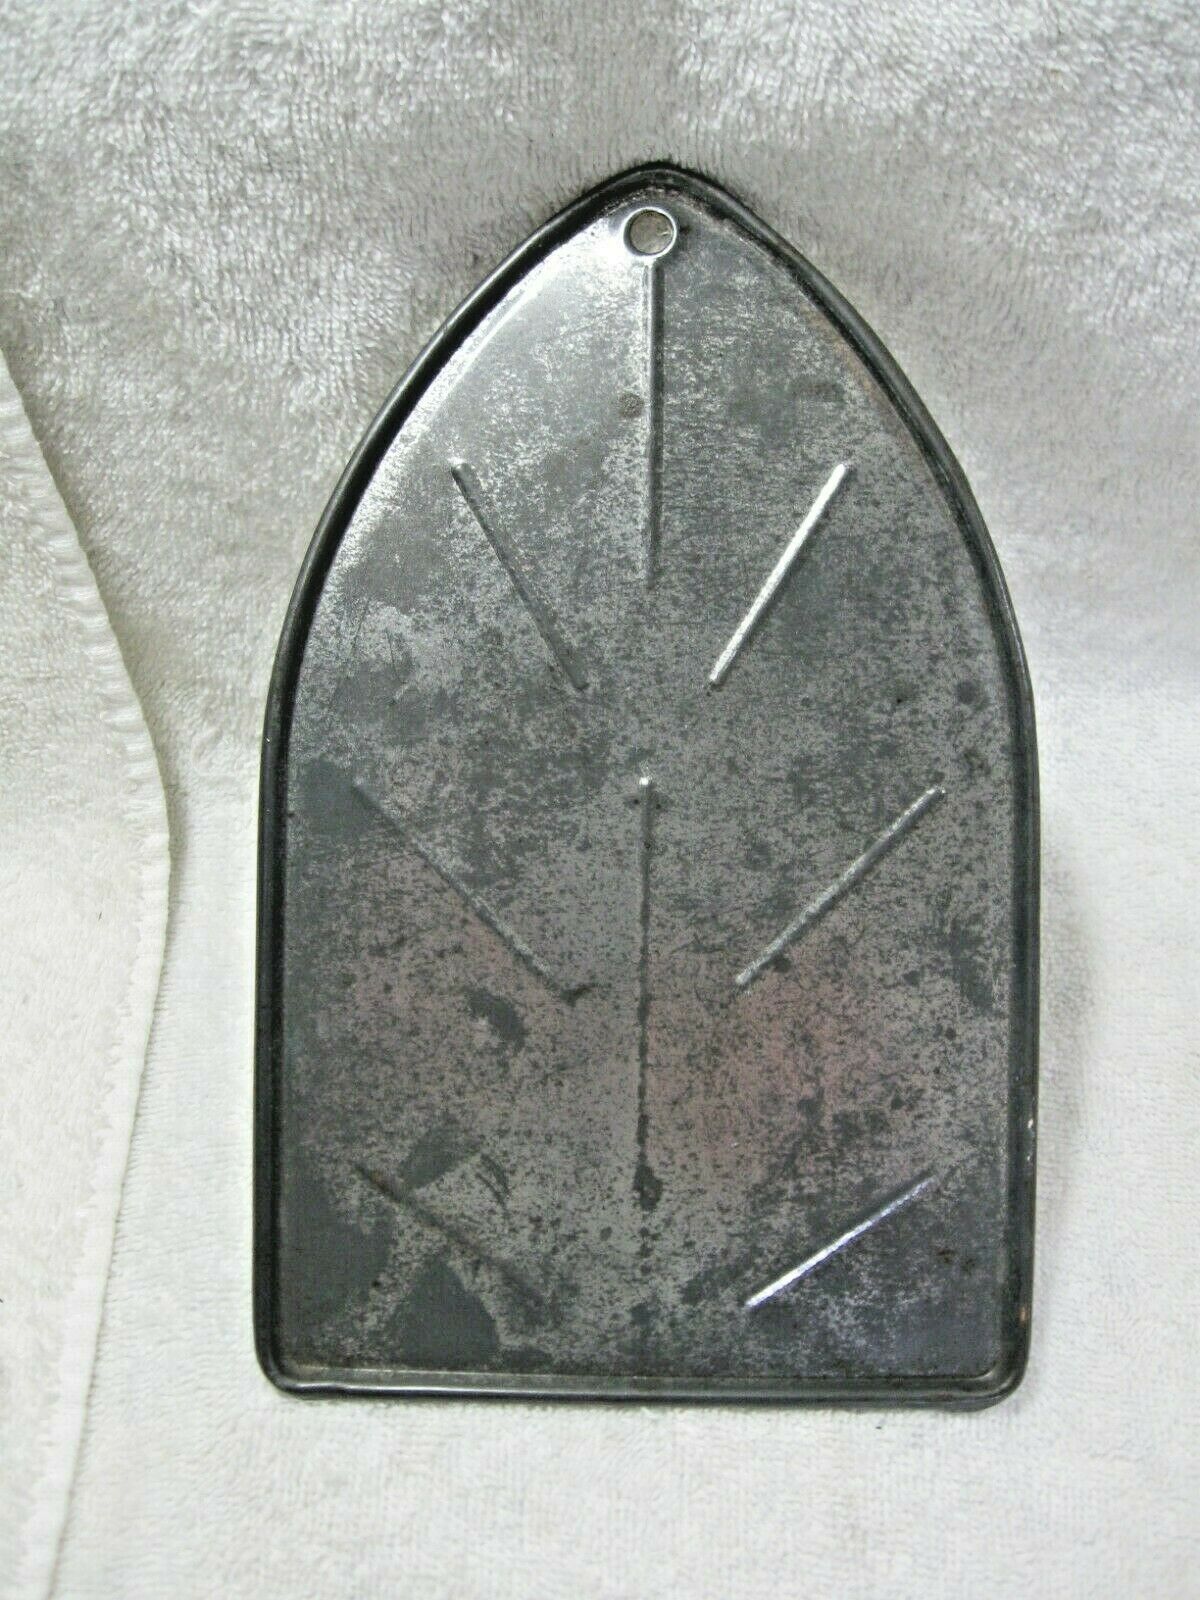 Vintage Collectible IRON TRIVET-GE-Sunbeam-Westinghouse-Dry Cleaner-Home Laundry - $19.95